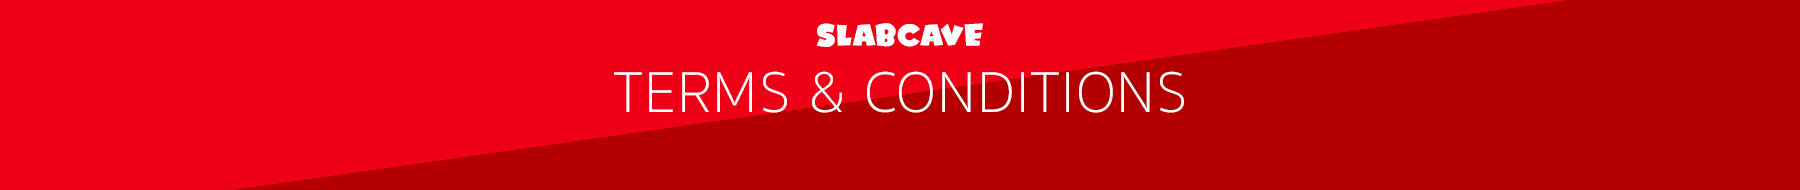 SlabCave Terms & Conditions Banner